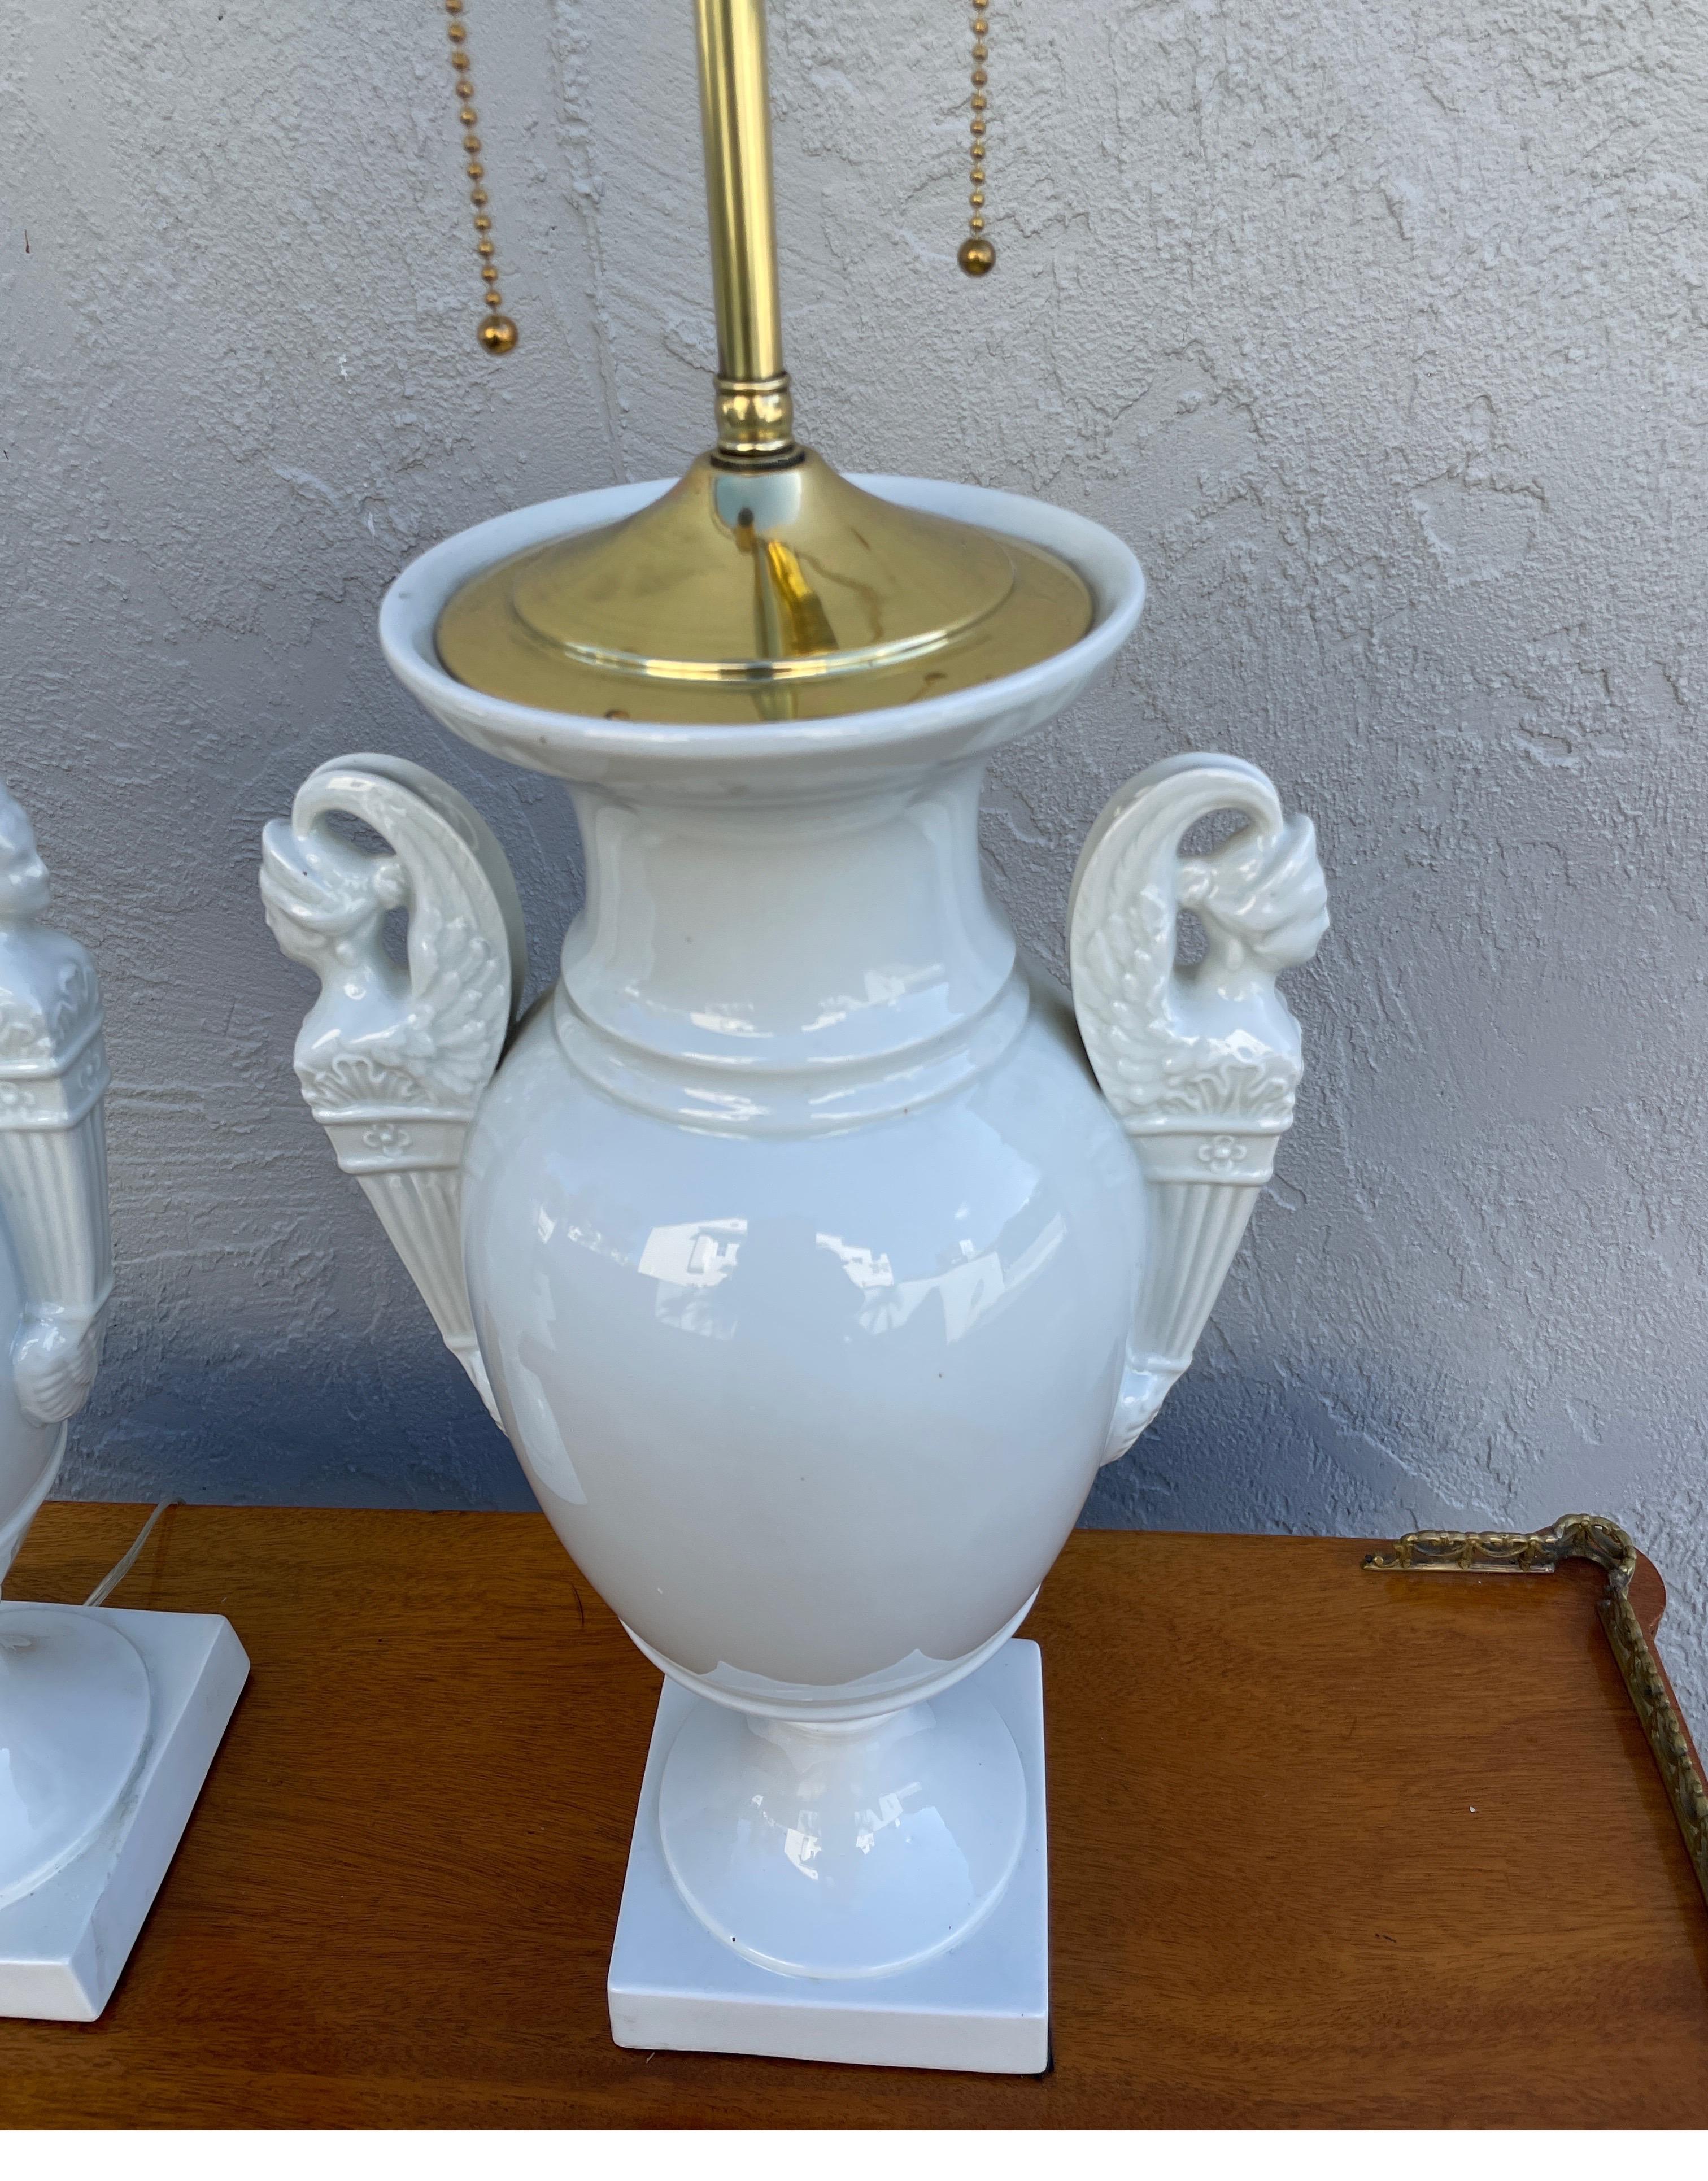 Pair of Vintage White Porcelain Neoclassical table lamps. Striking pair of Urn shaped lamps with figural handles. The top has a solid brass cap and sockets.